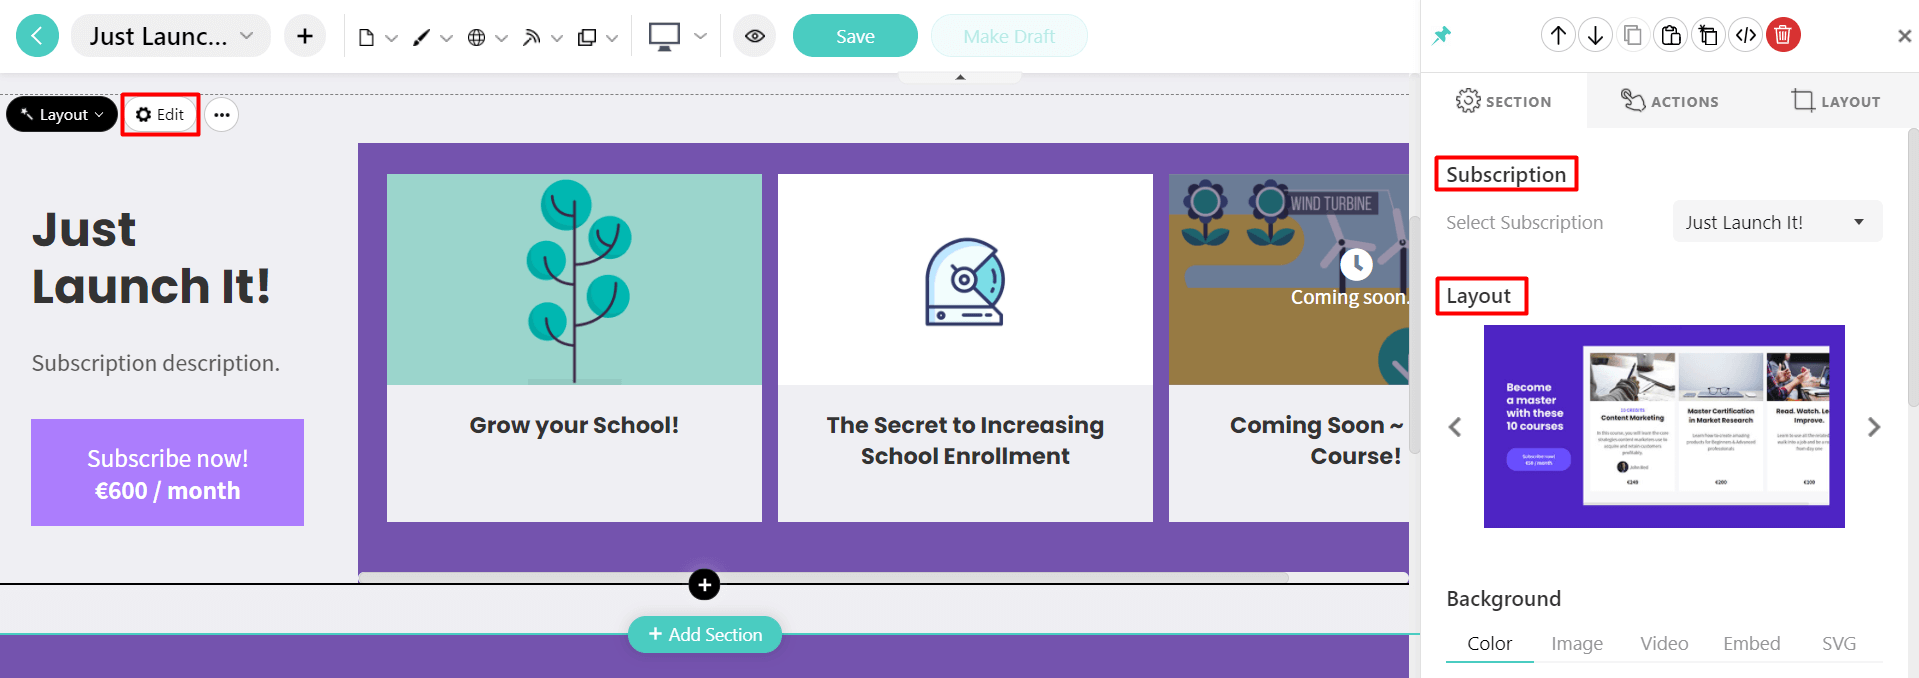 Example of subscription page on LearnWorlds